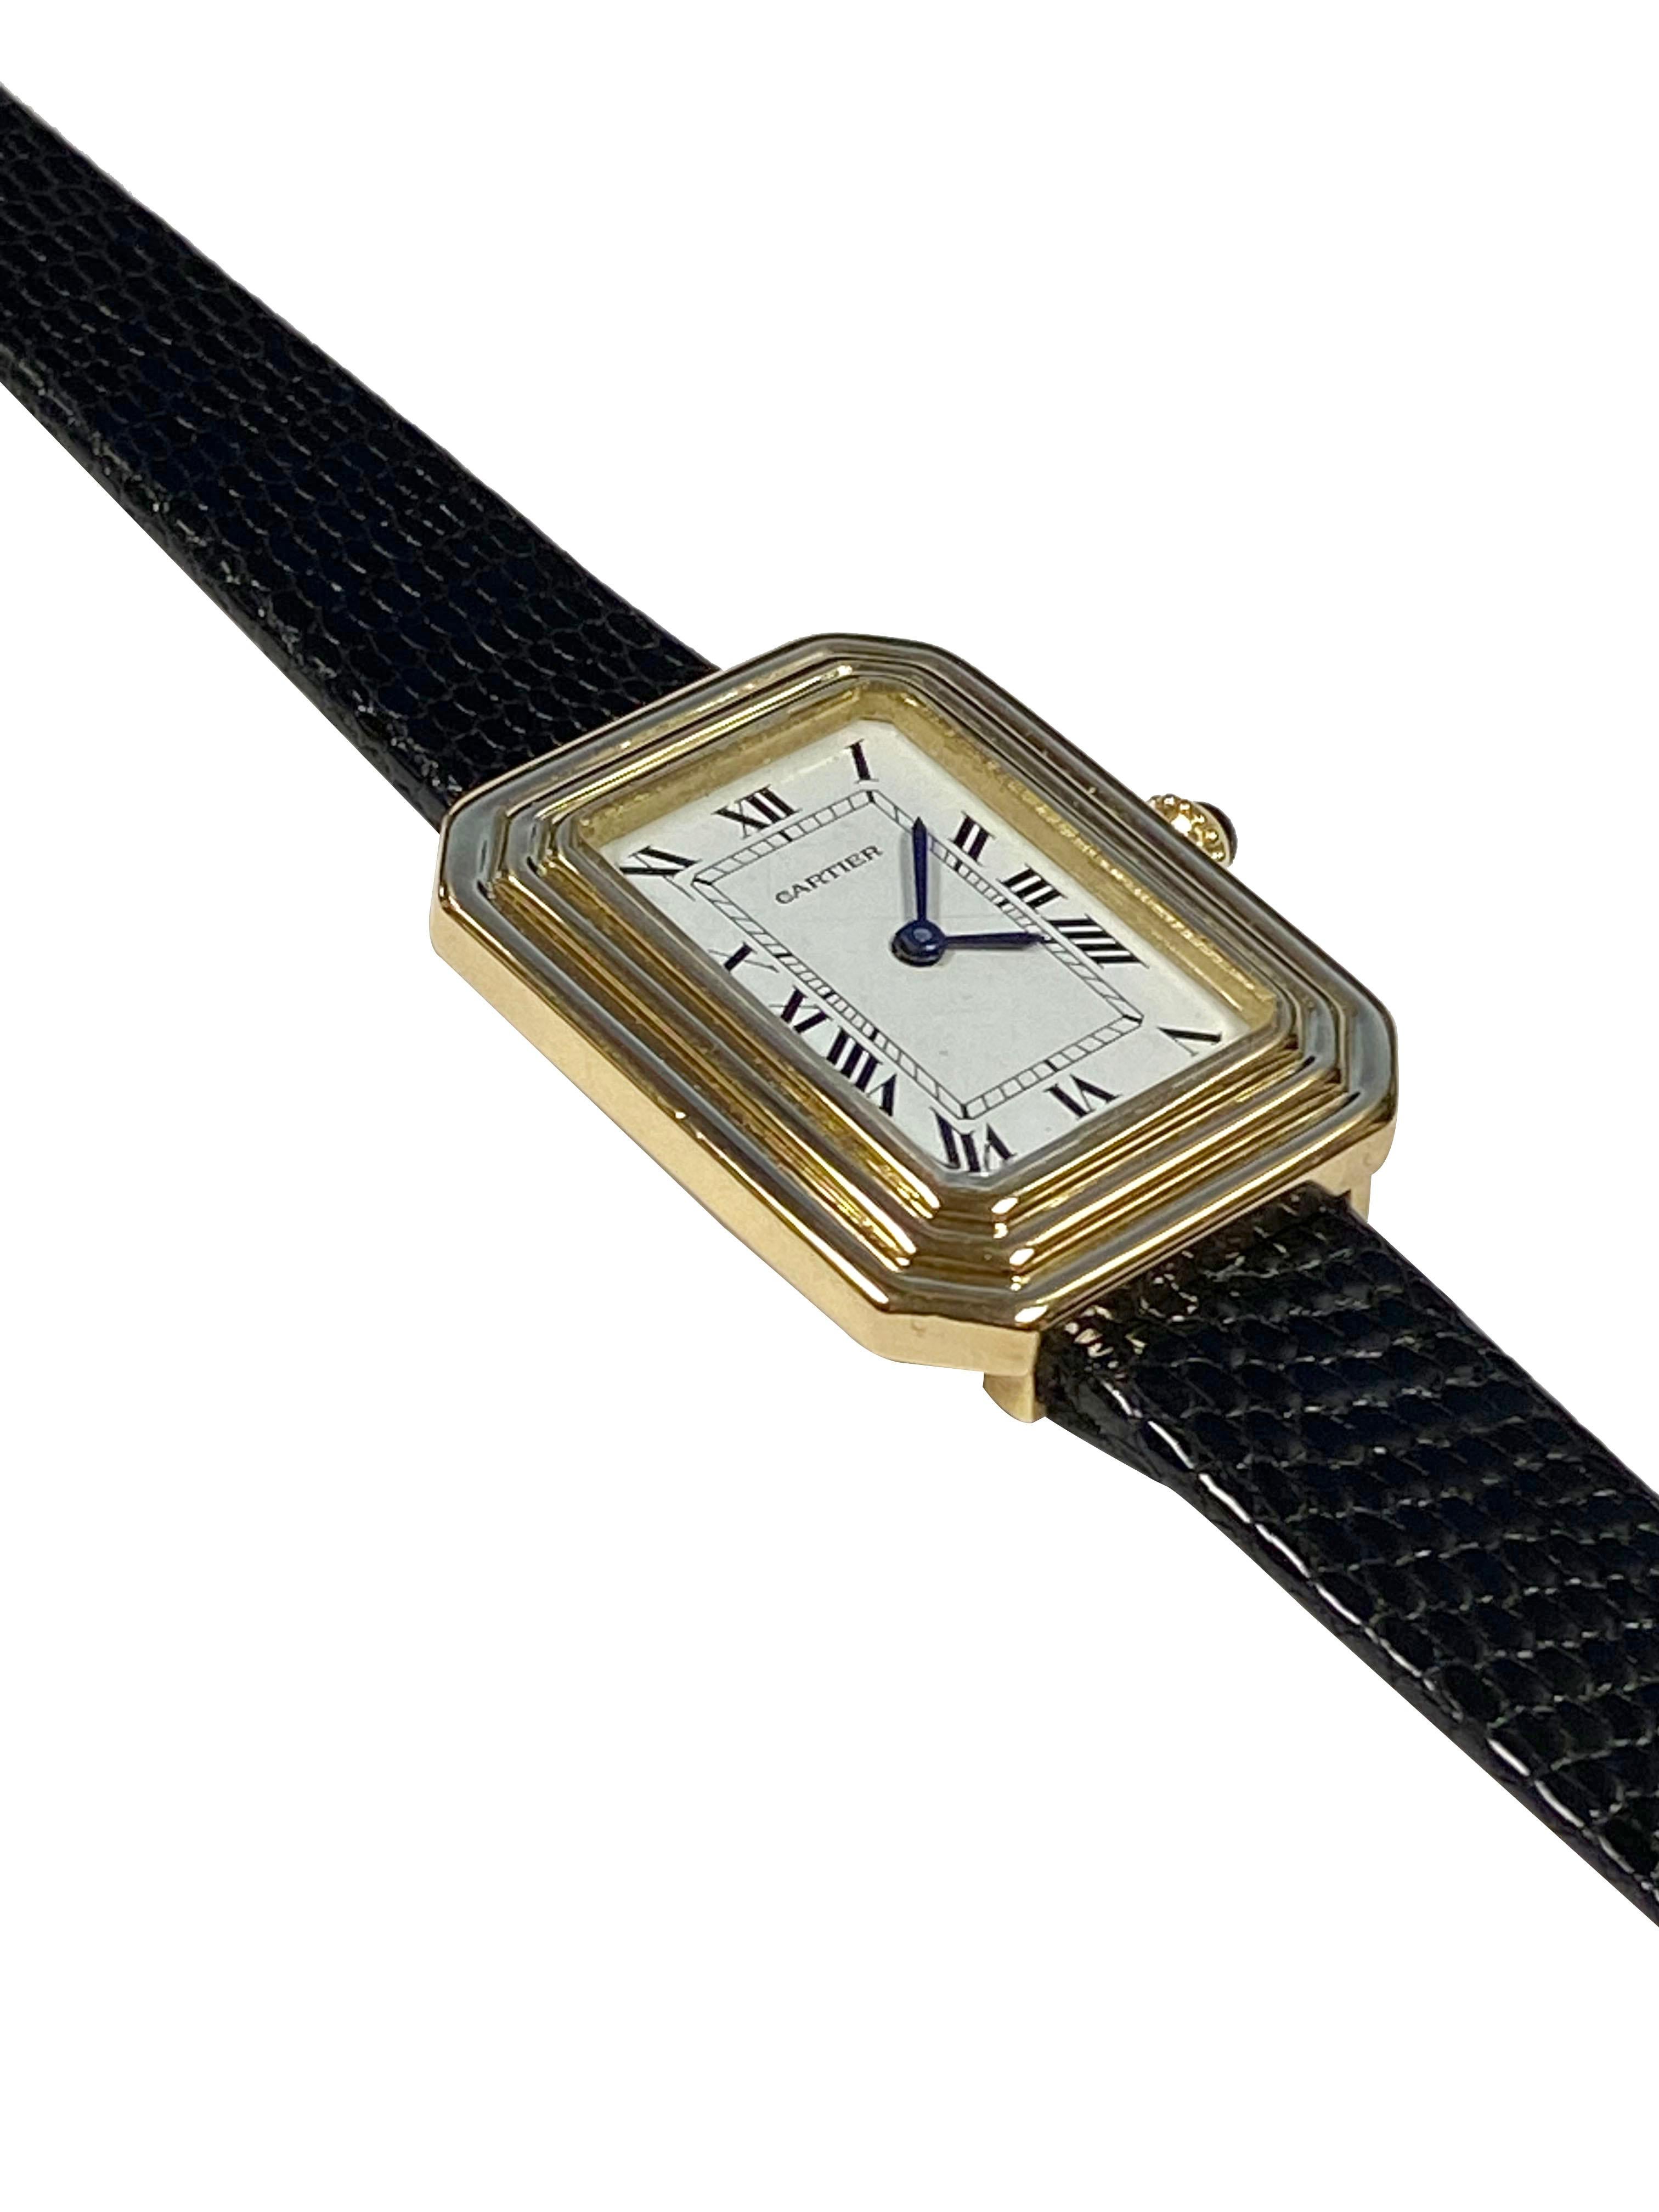 Circa 1970s Cartier Mid Size Wrist Watch, 30 X 24 M.M. 18K Yellow Gold 2 Piece Stepped Case. 17 Jewel Mechanical, Manual wind movement, Sapphire Crown, White Enamel Dial with Black Roman Numerals. New Black Lizard strap, watch length 8  3/4 inches.